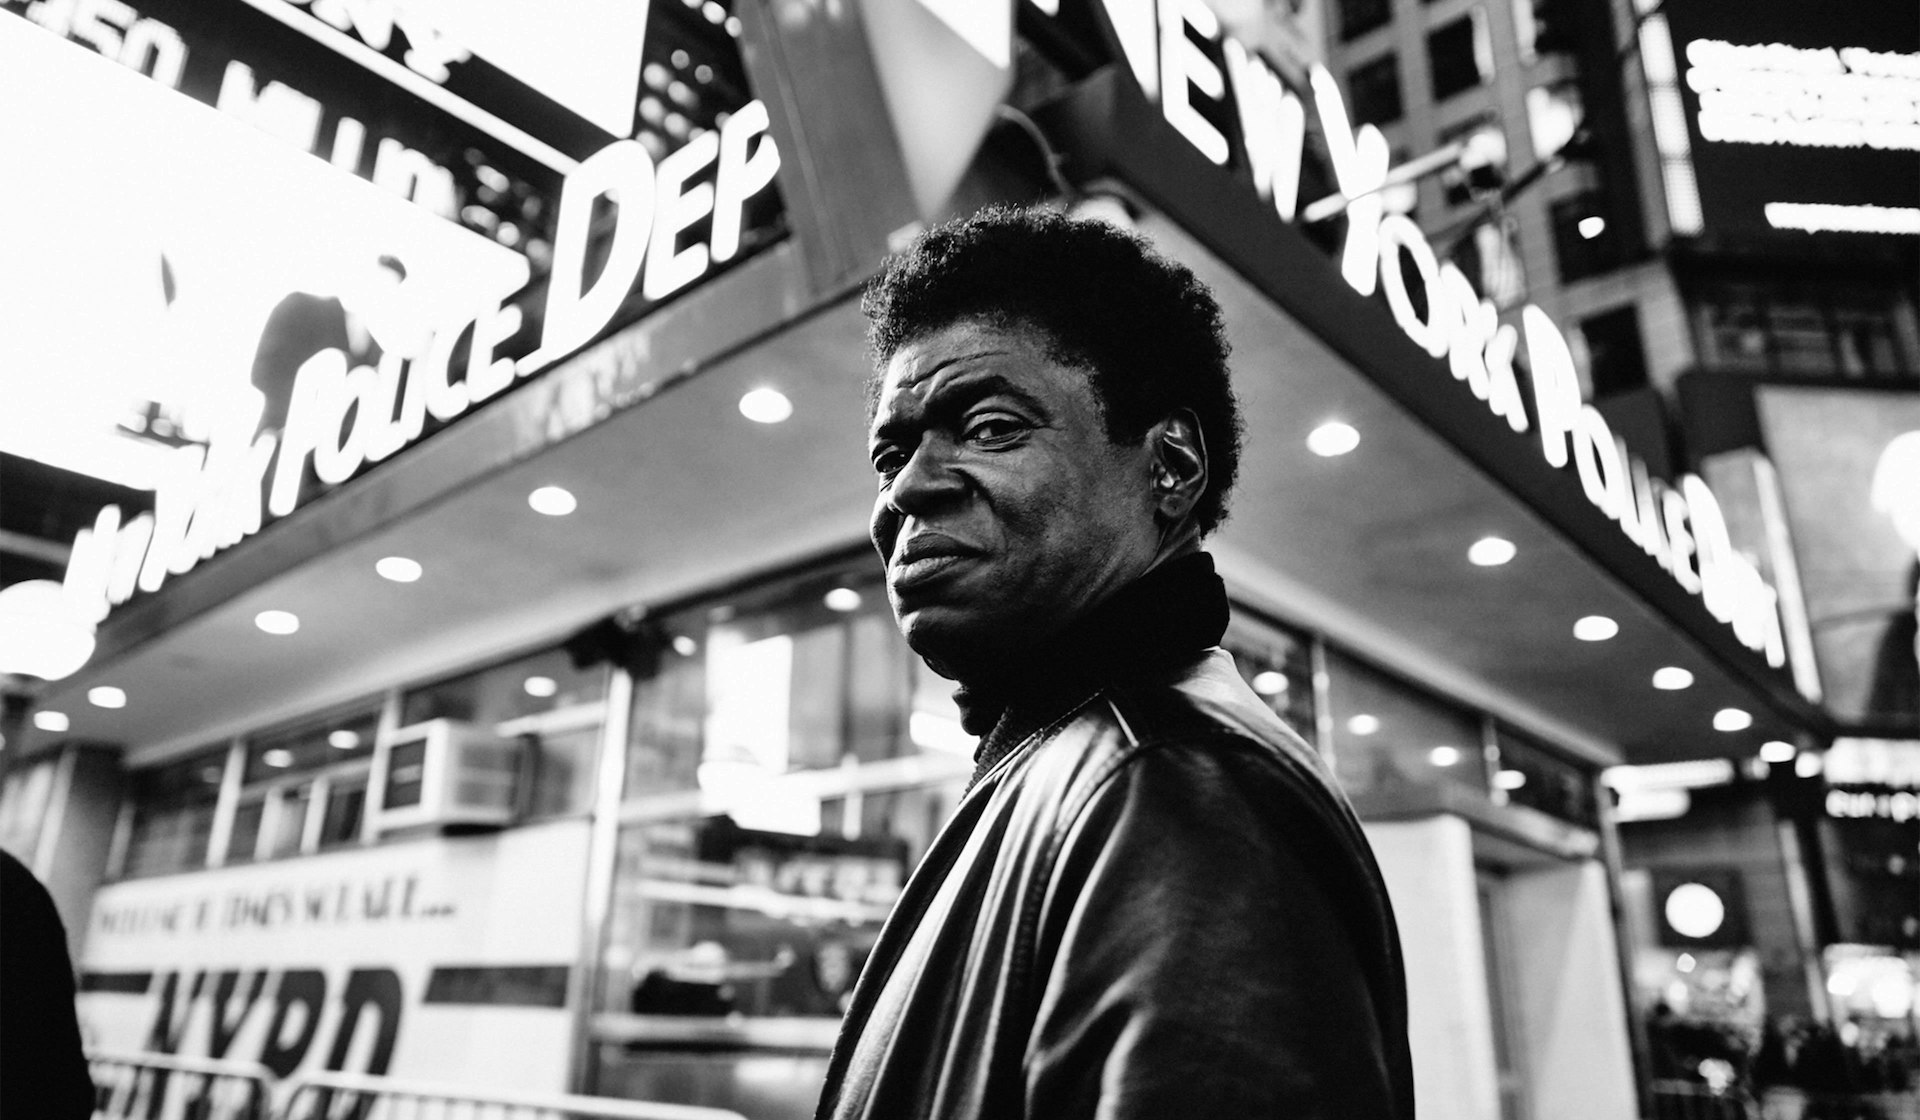 Charles Bradley is still searching for love